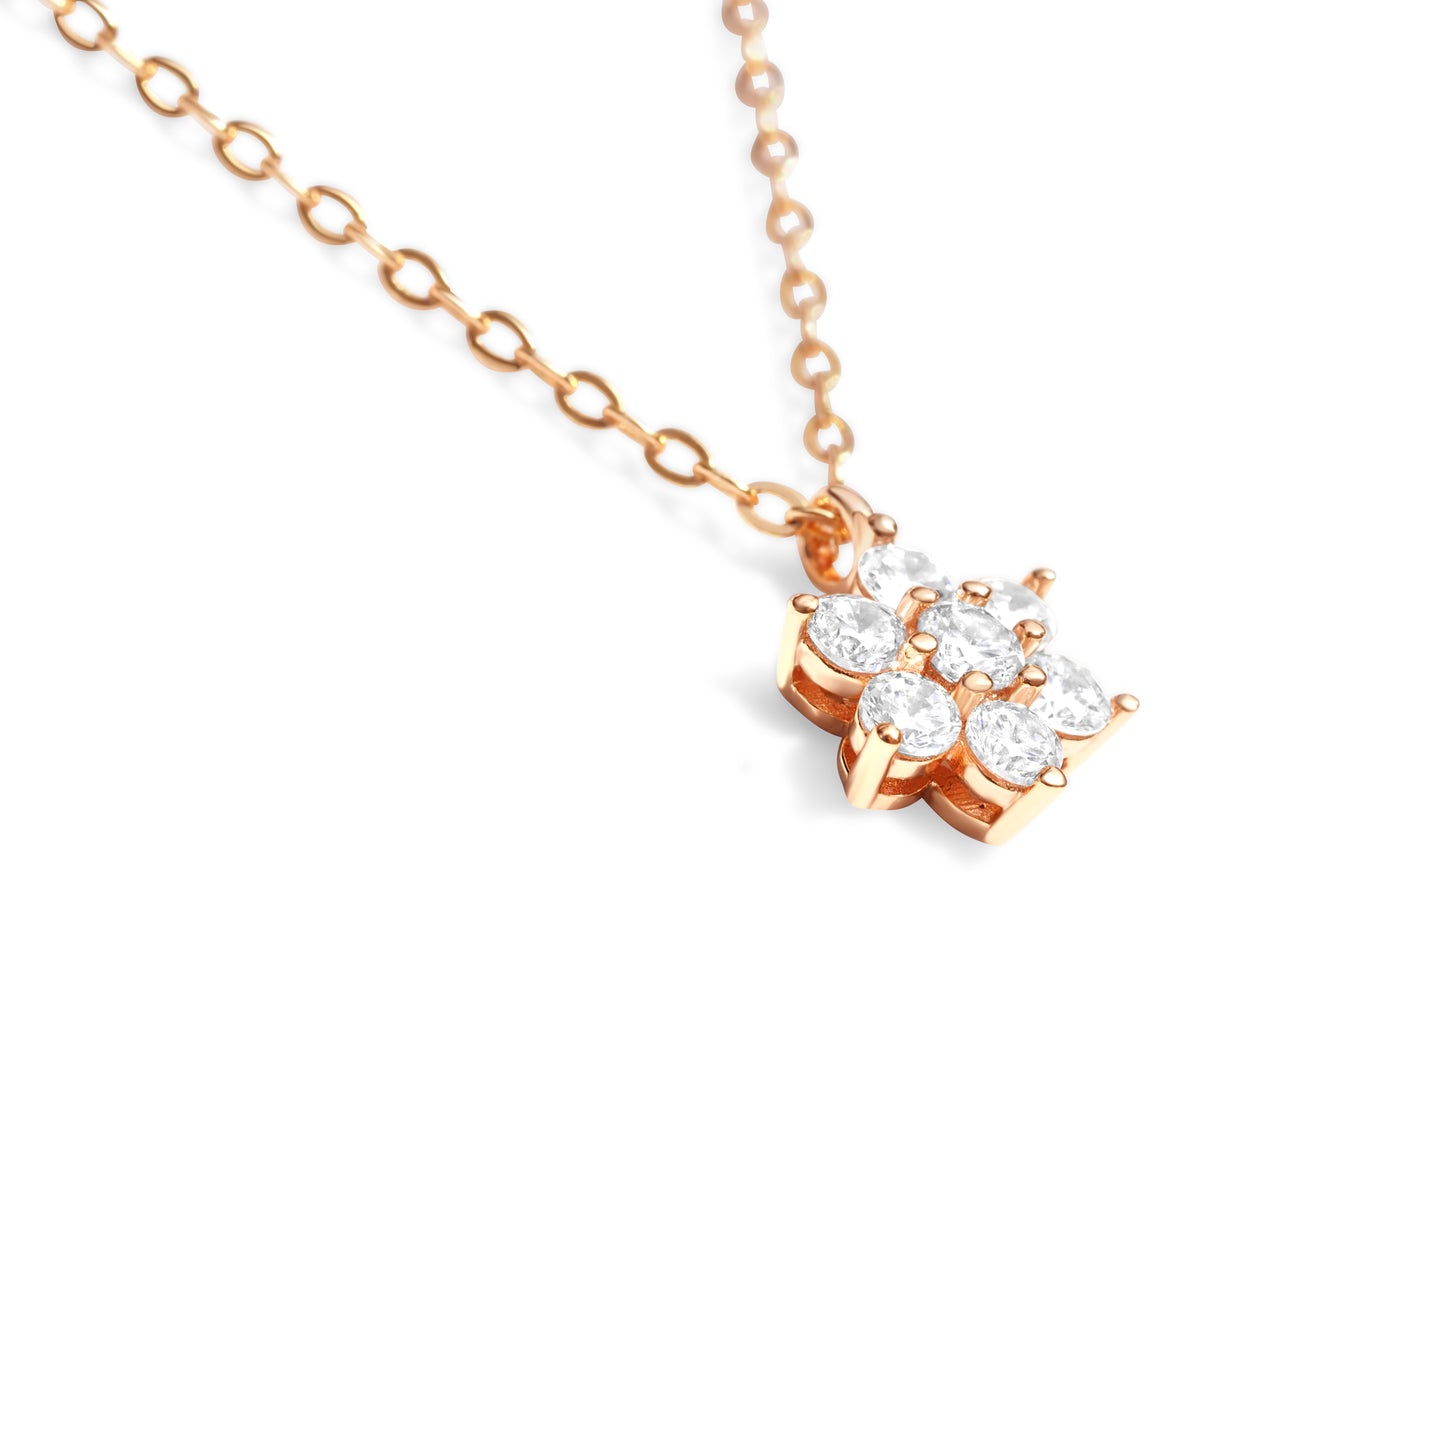 Blossom N1008R Necklace